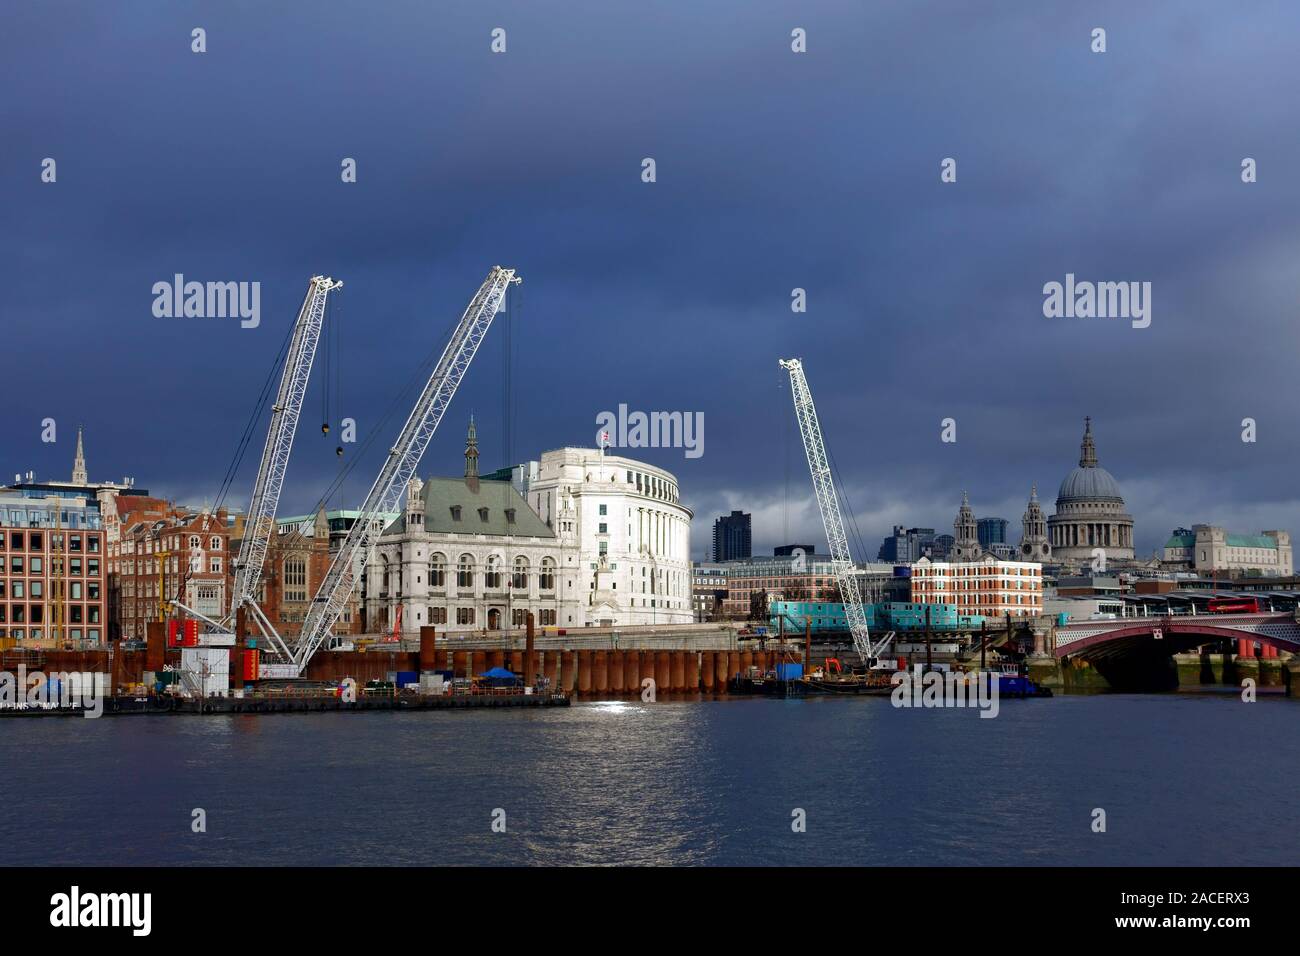 Dark skies over the Blackfriars district of London with large cranes on the waterfront and Greyfriars Bridge to the right Stock Photo